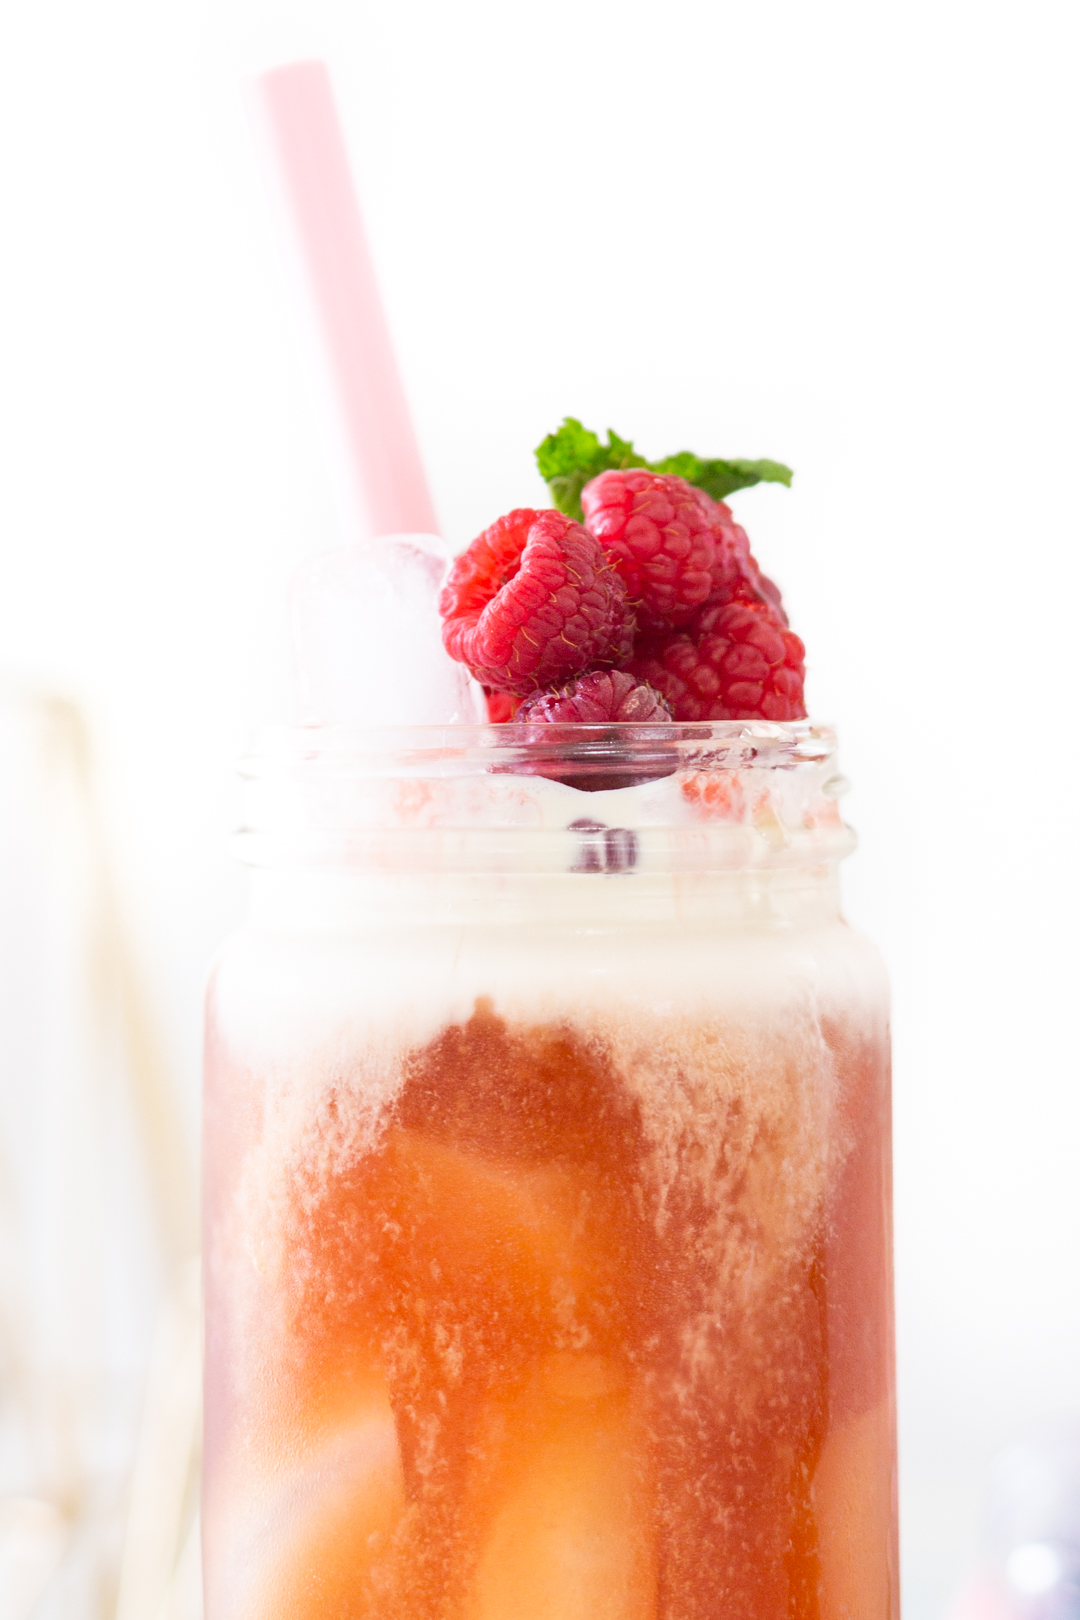 creamy raspberry tea topped with fresh fruit and herbs.